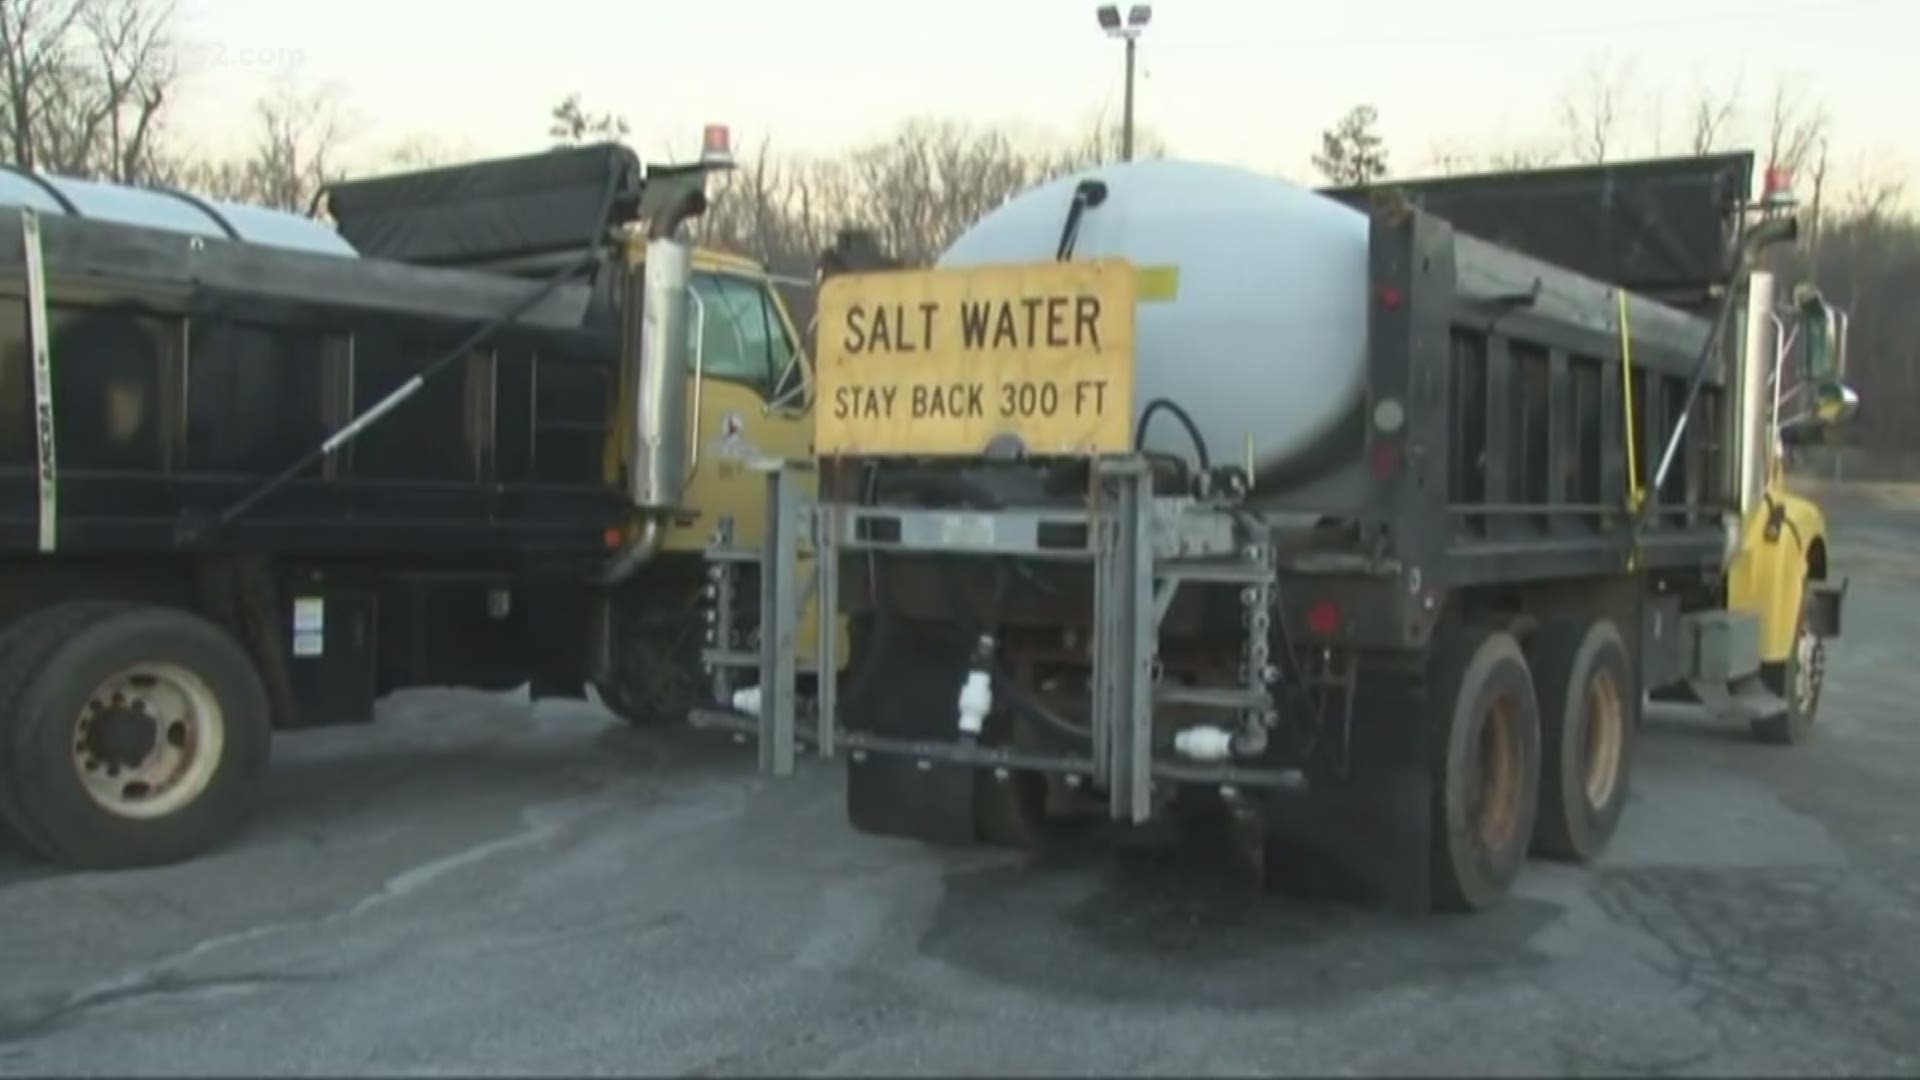 On Friday, crews plan to spray brine on the city's streets to help keep drivers safe.